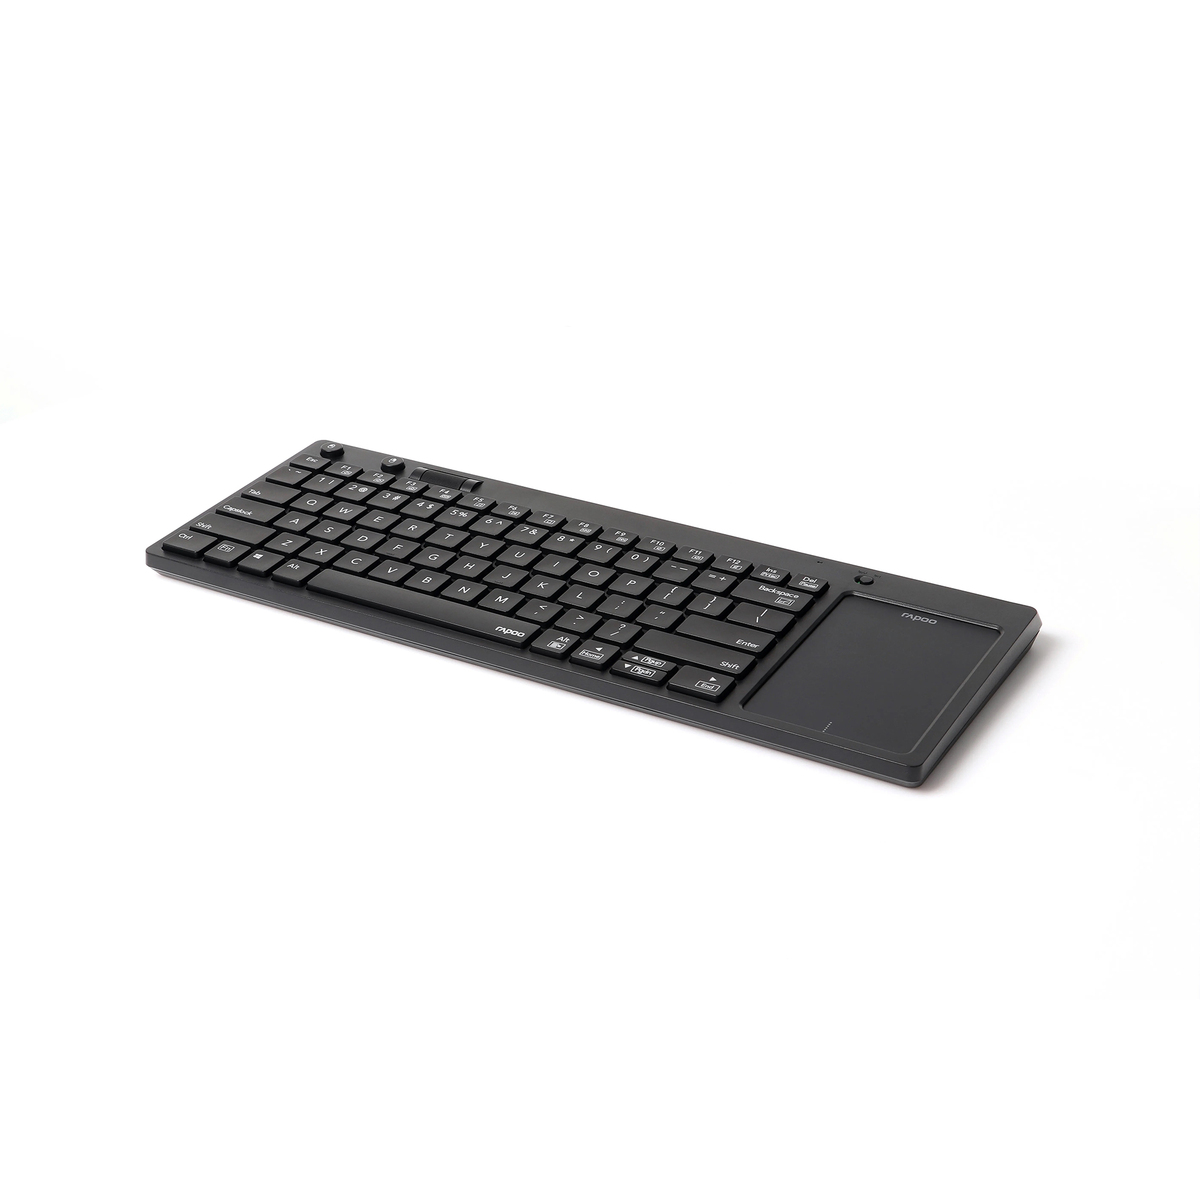 Rapoo Keyboards K2800 Wireless Tv Keyboard With Touchpad, Easy Media Control And Built-In Big Size Touchpad (Black)